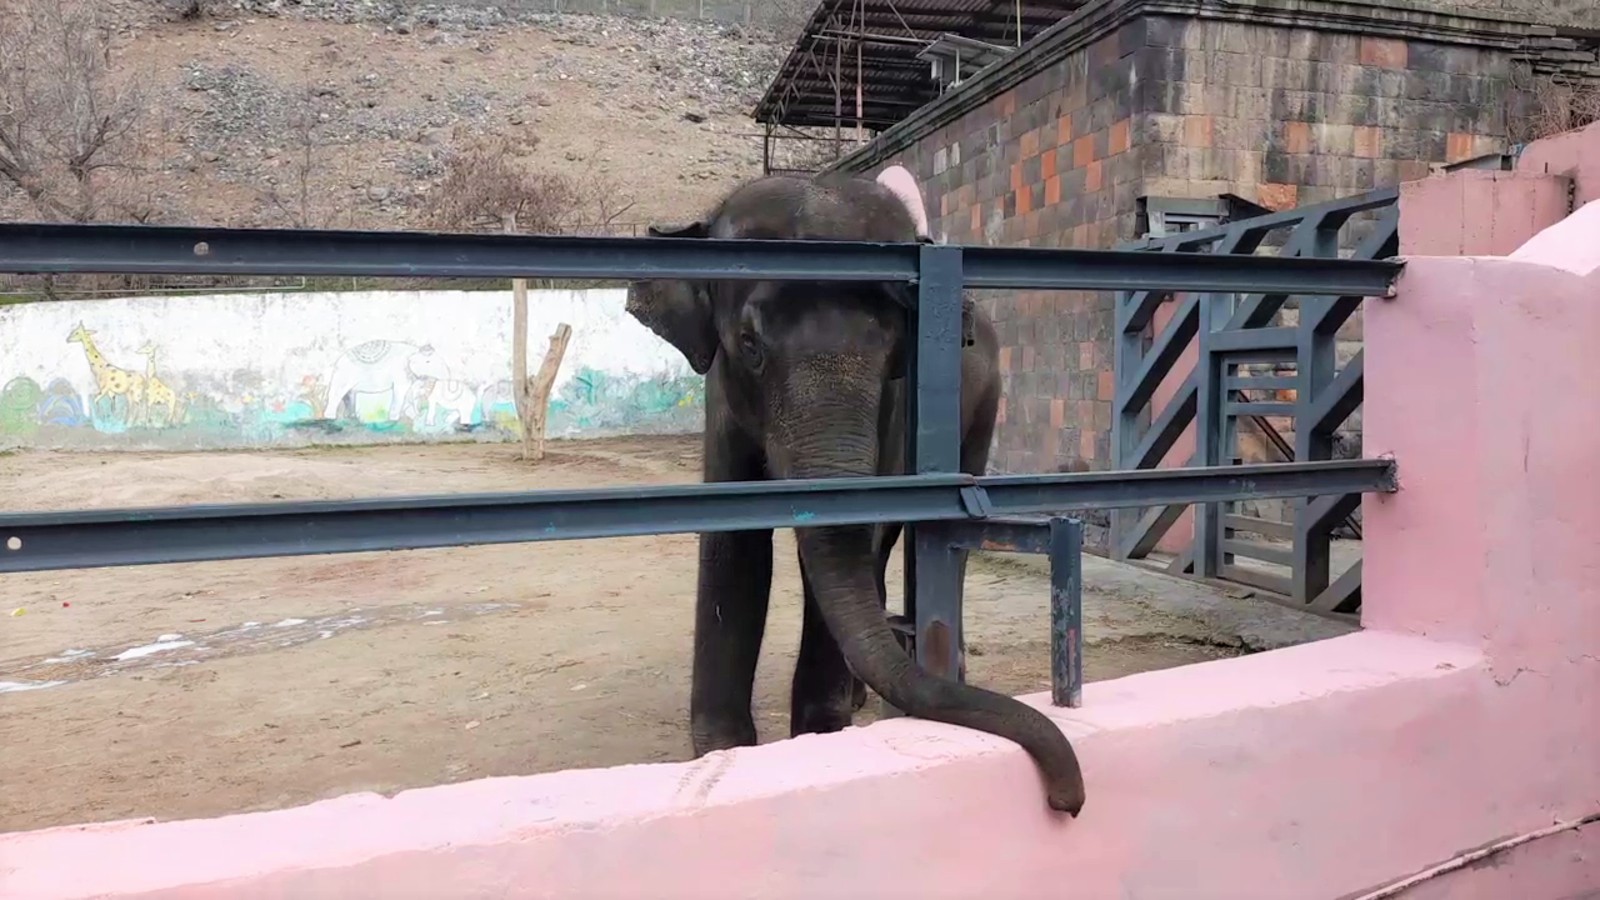 A photo of a lonely Asian elephant in a barren zoo enclosure